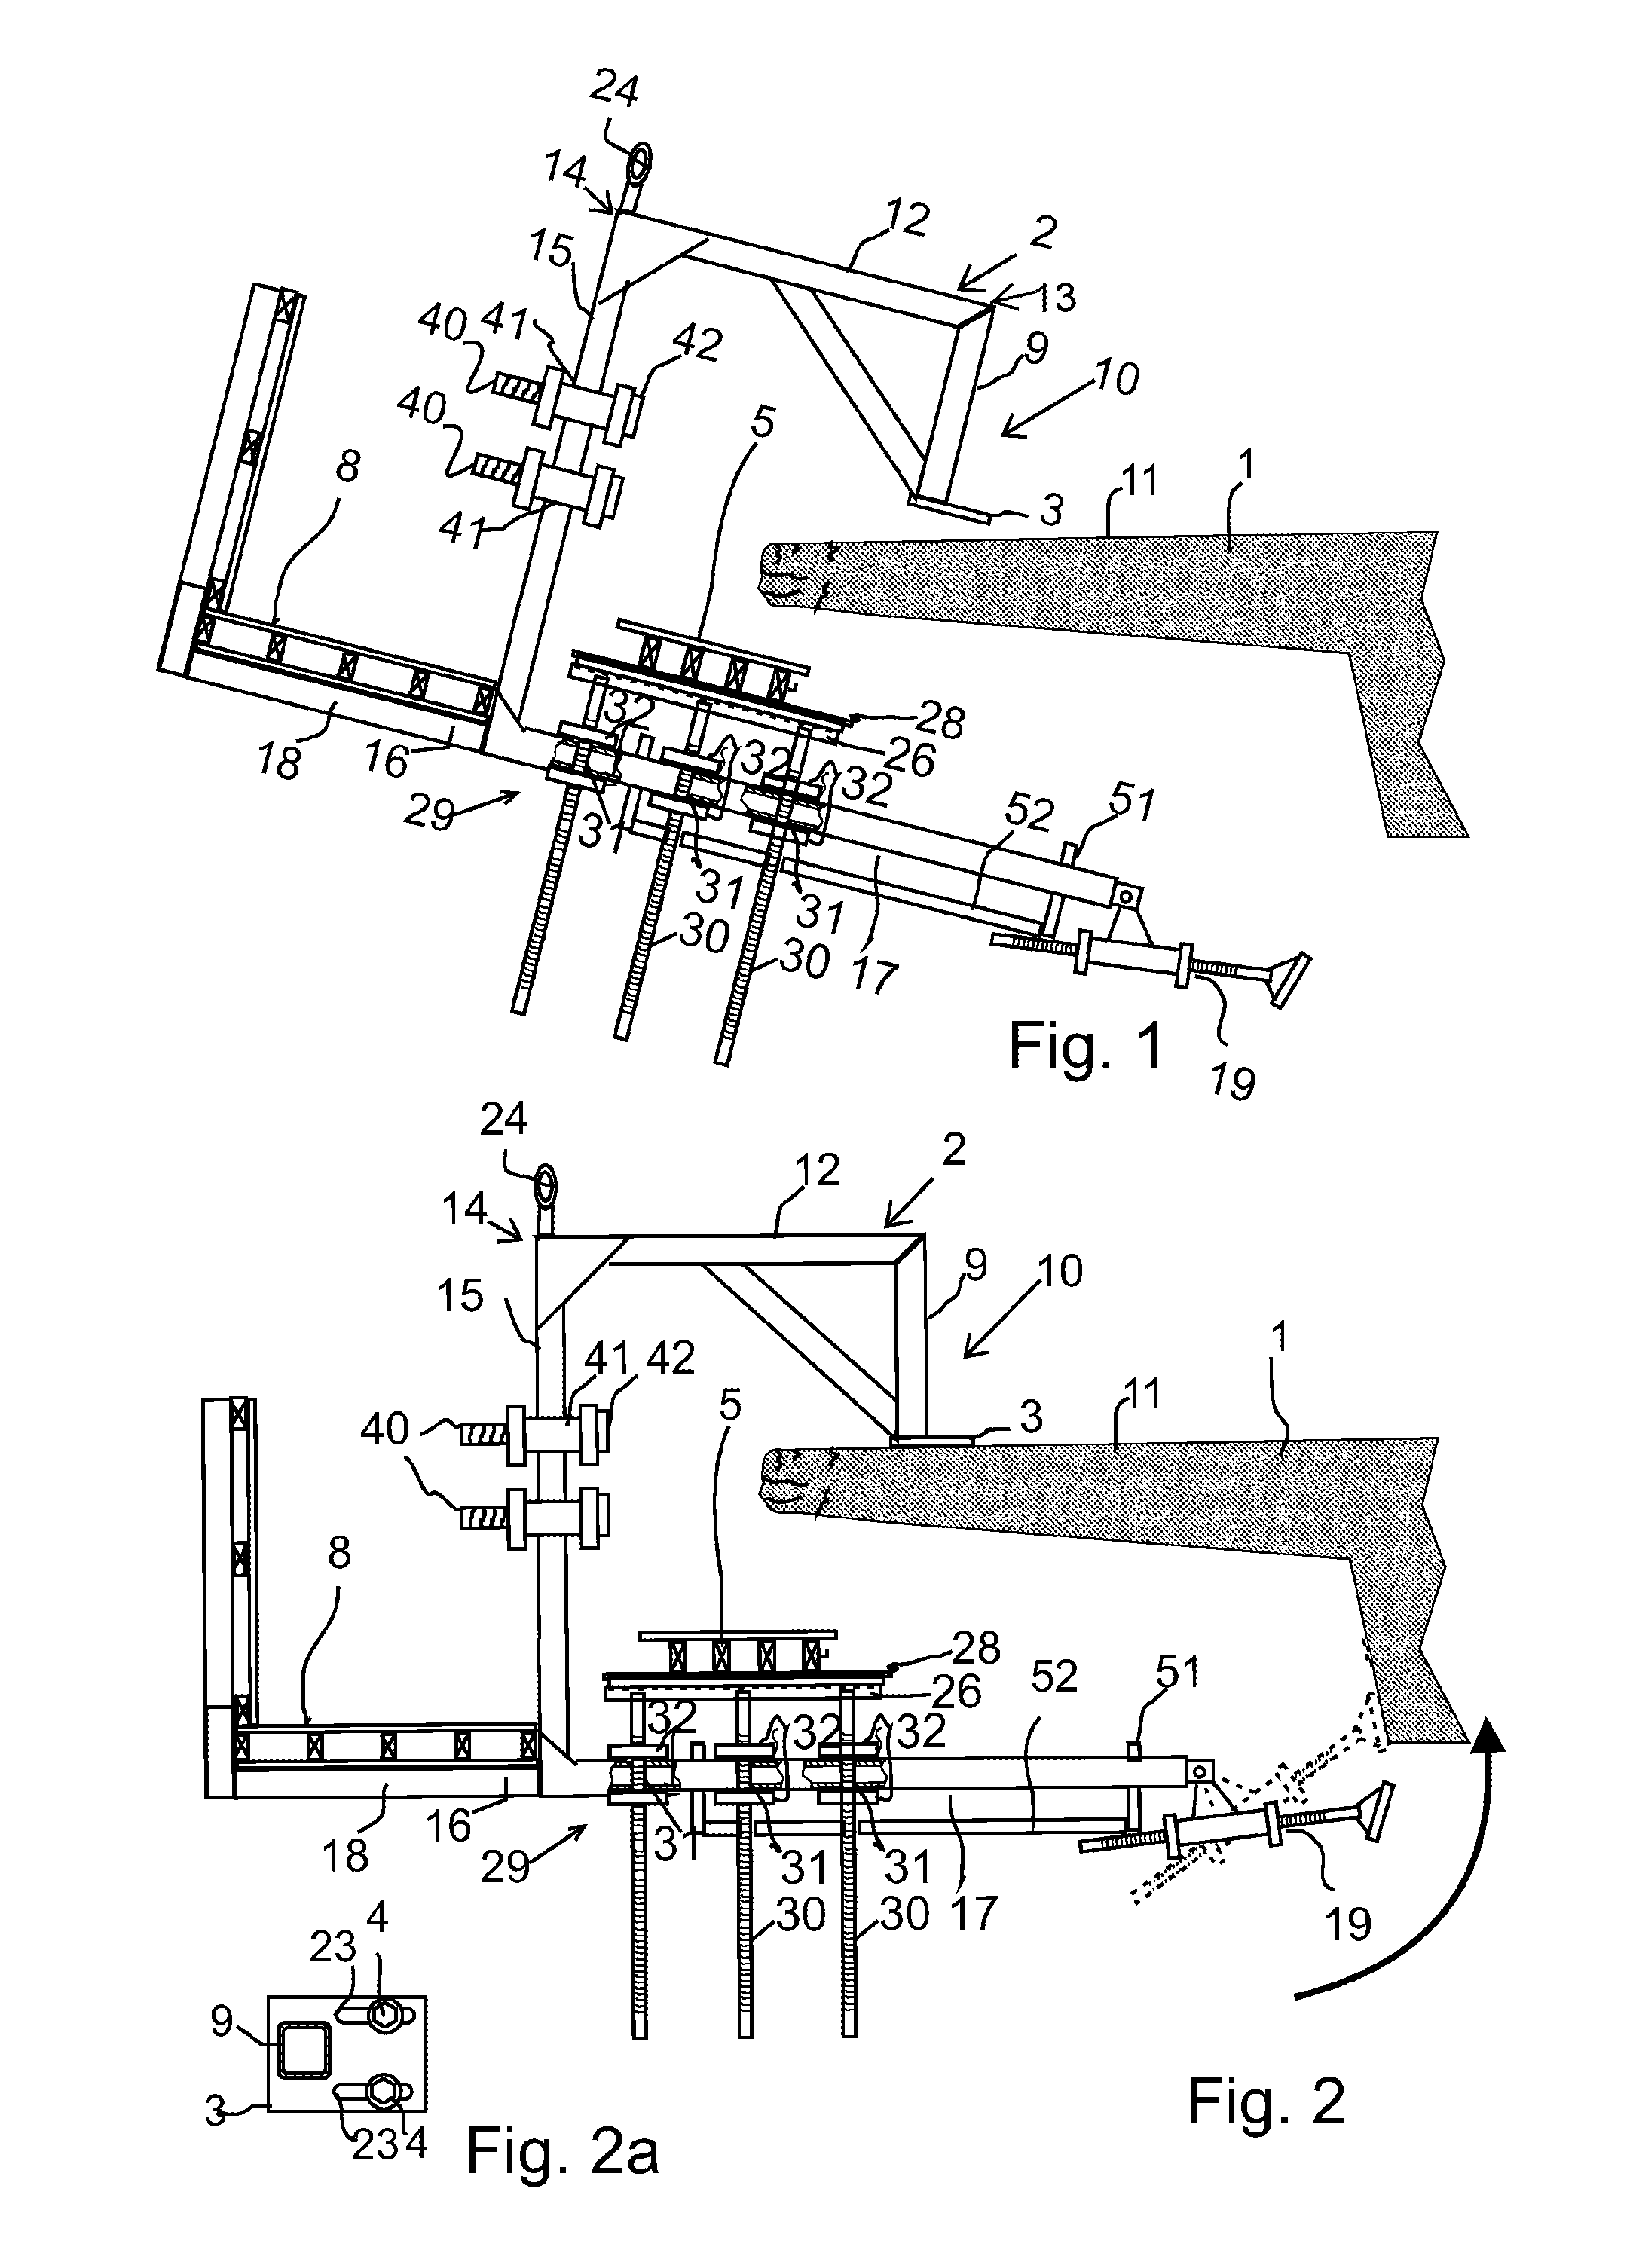 Scaffold element, arrangement and method of use